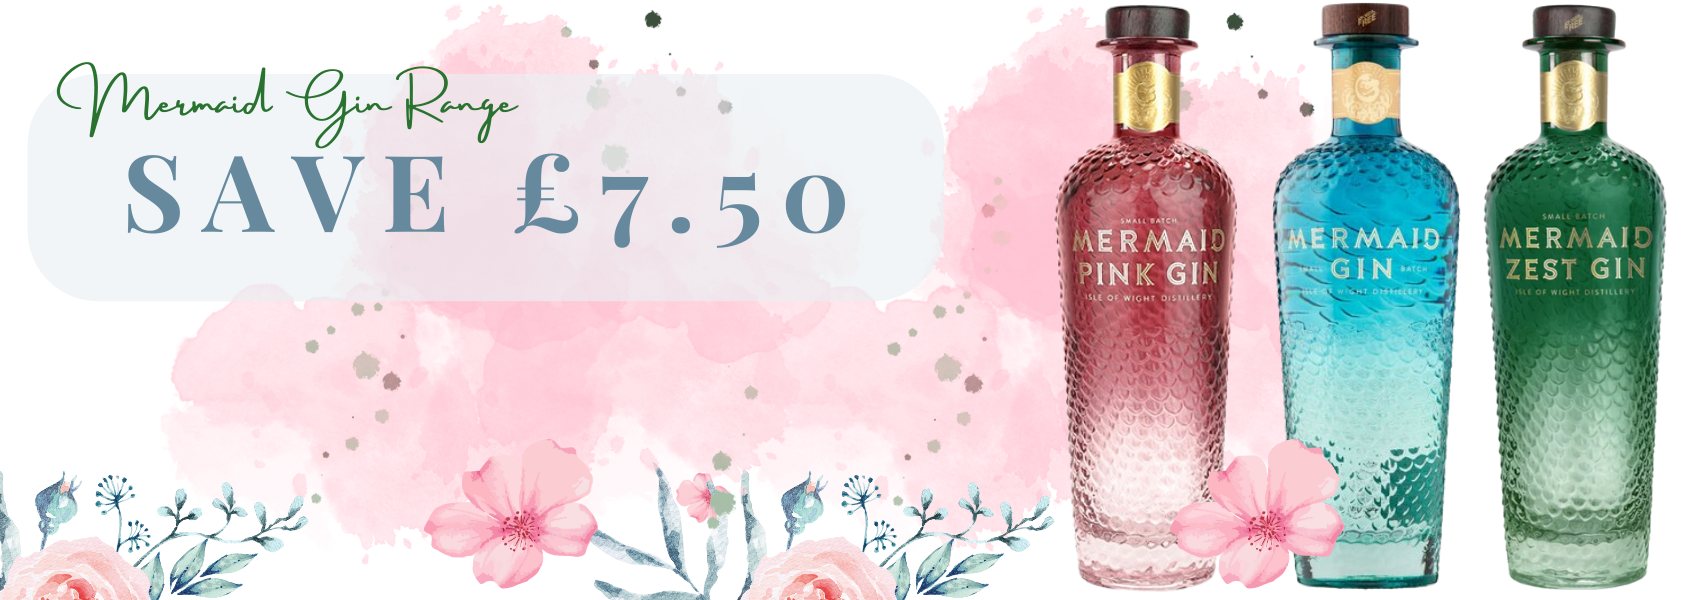 mermaid gin offers save £7.50